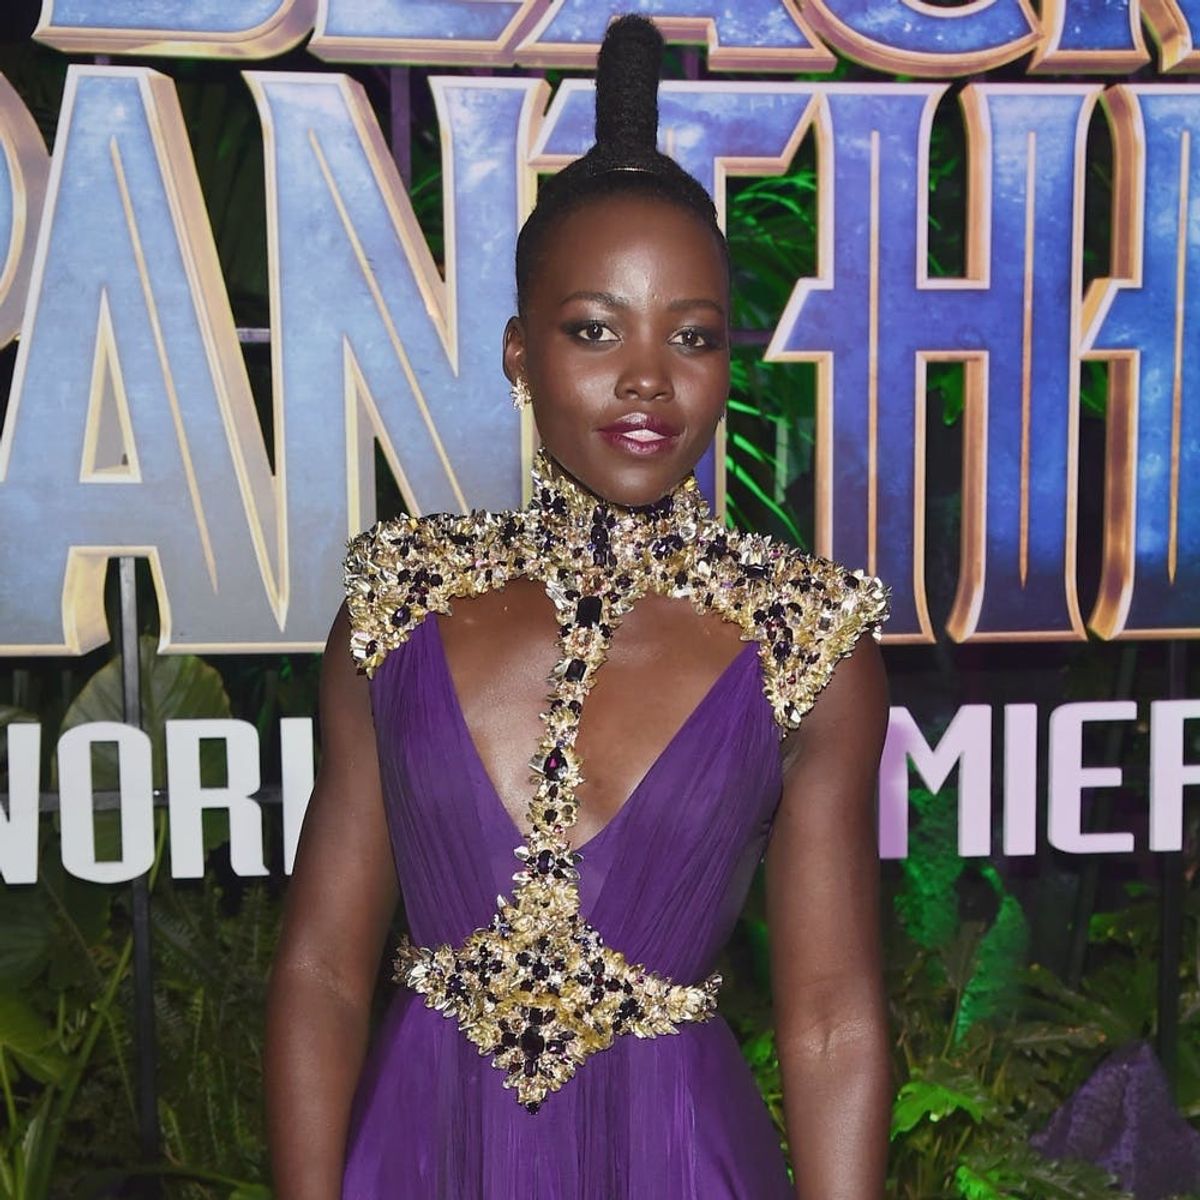 ‘Black Panther’ Had its Premiere Last Night and *EVERYONE* Is Freaking Out